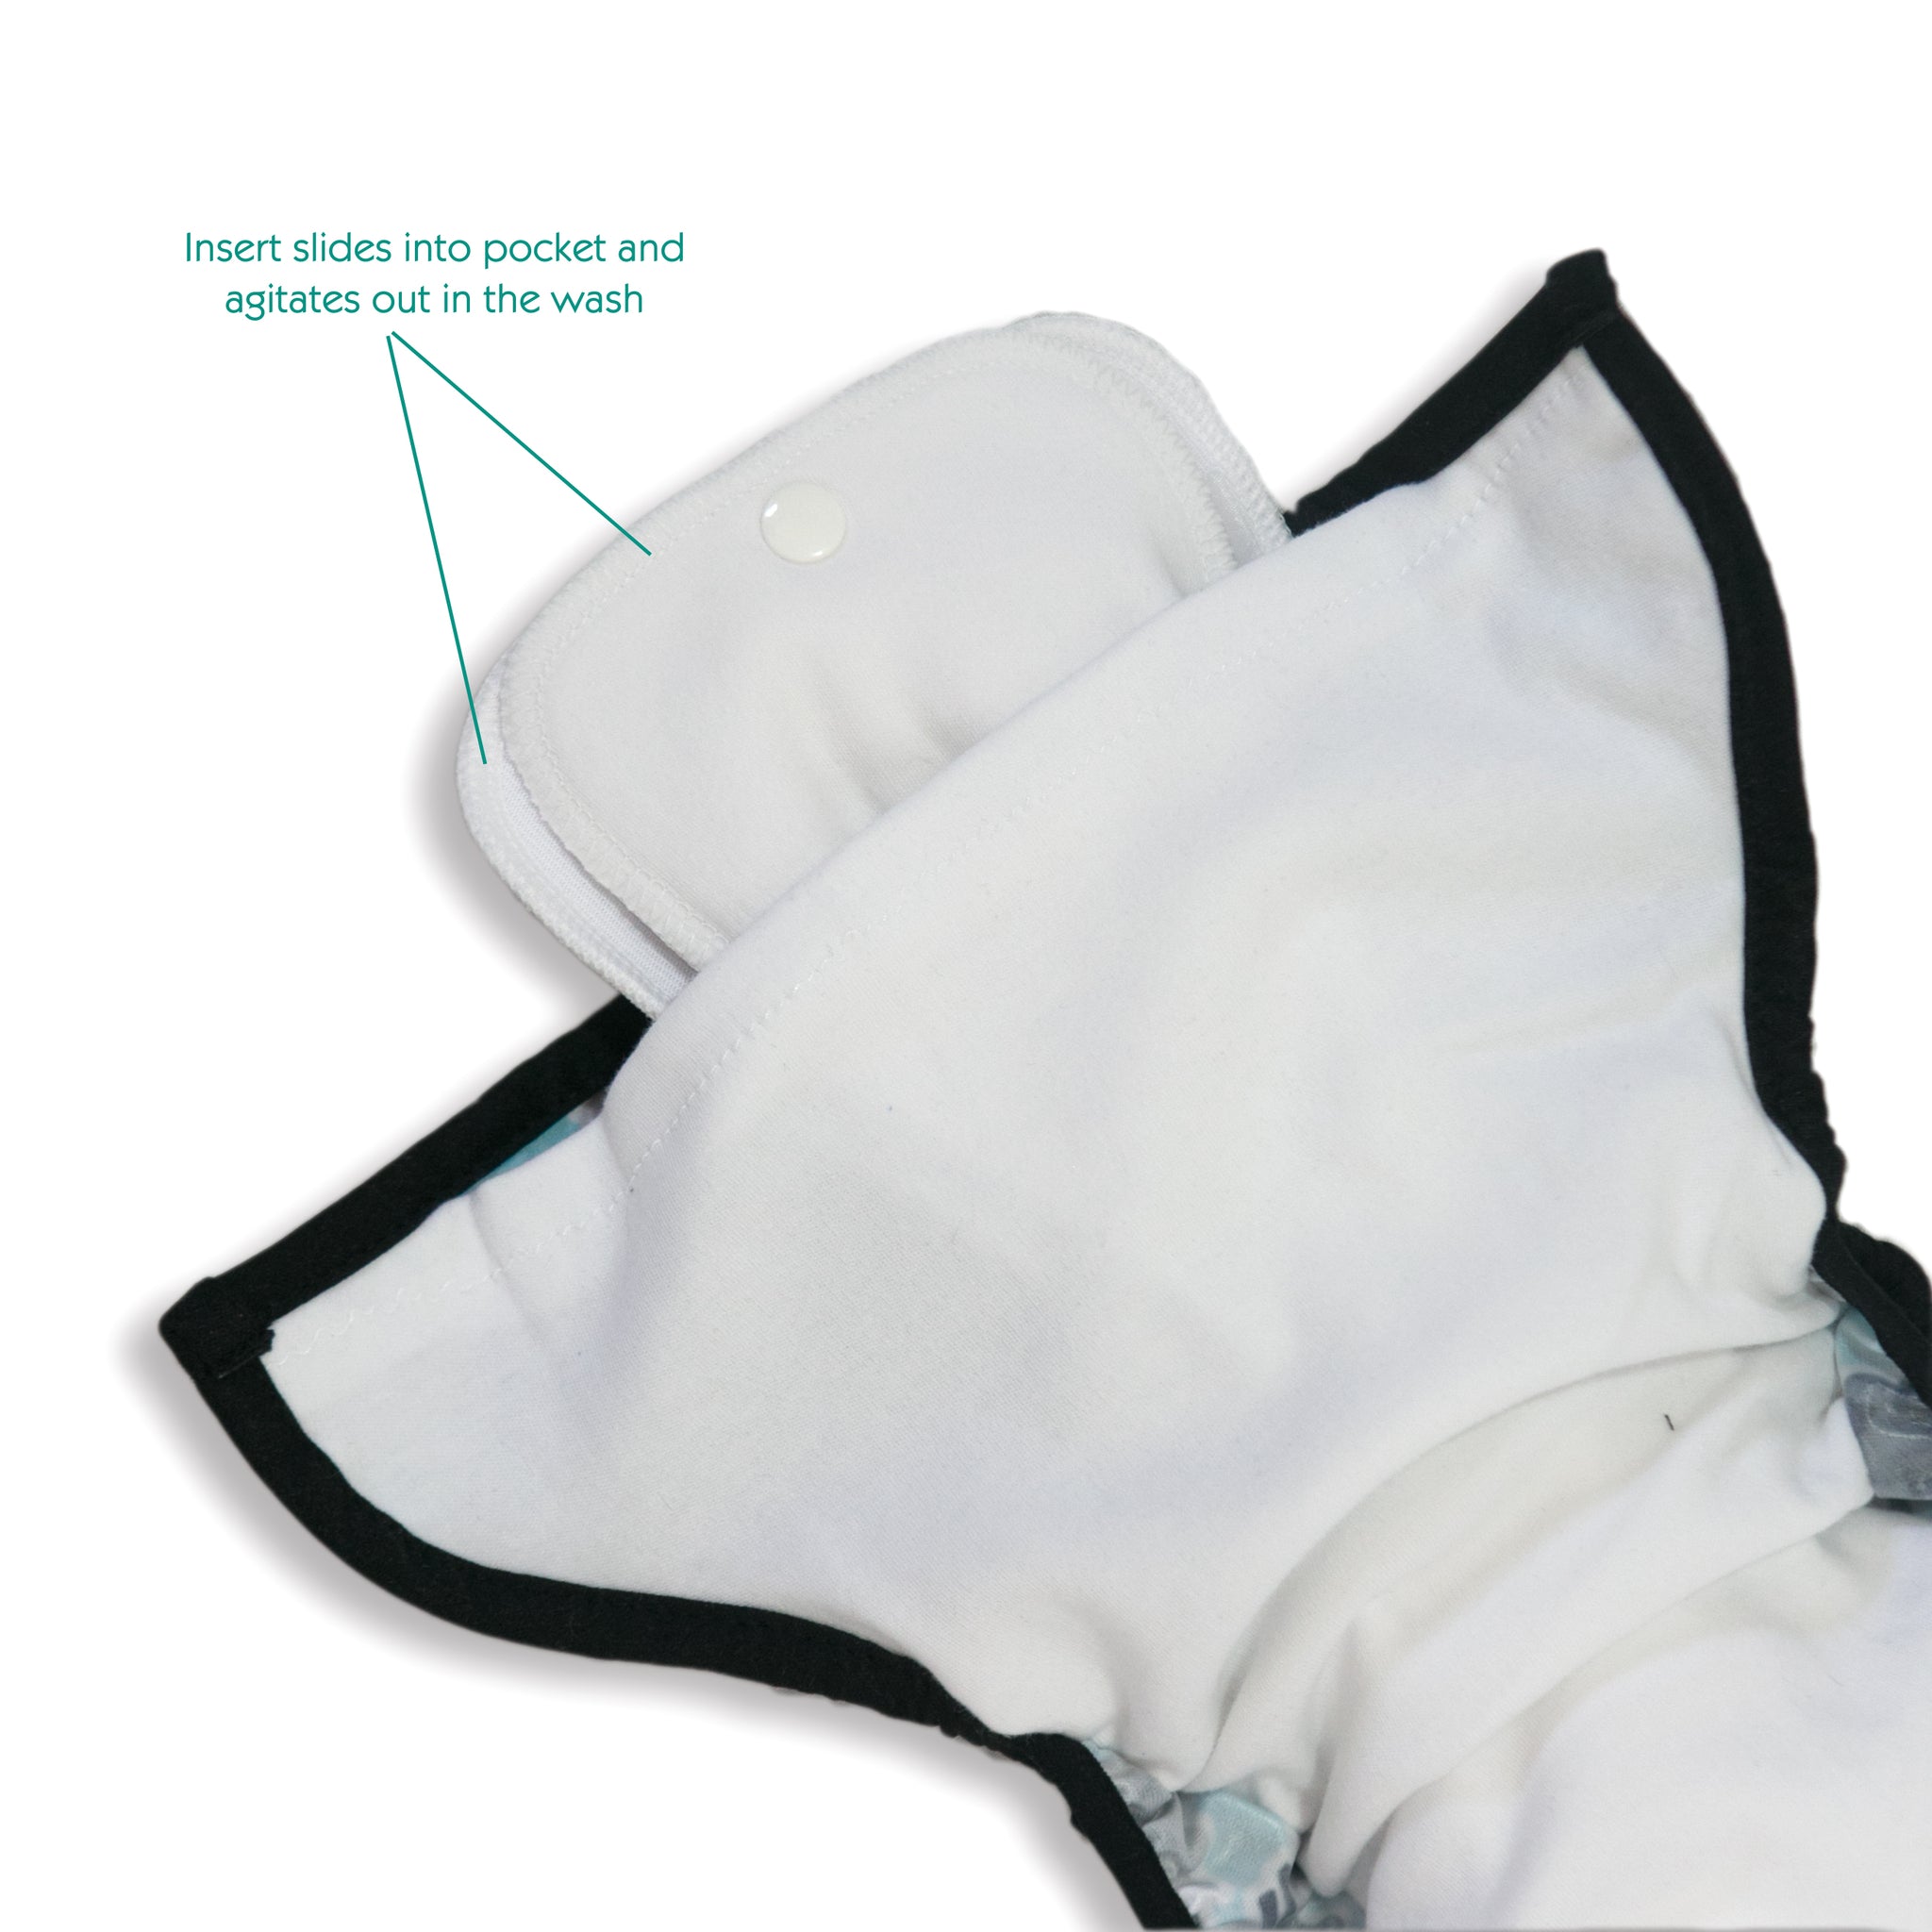 -image of natural pocket diaper insert--insert slides into pockets and agitates out in the wash